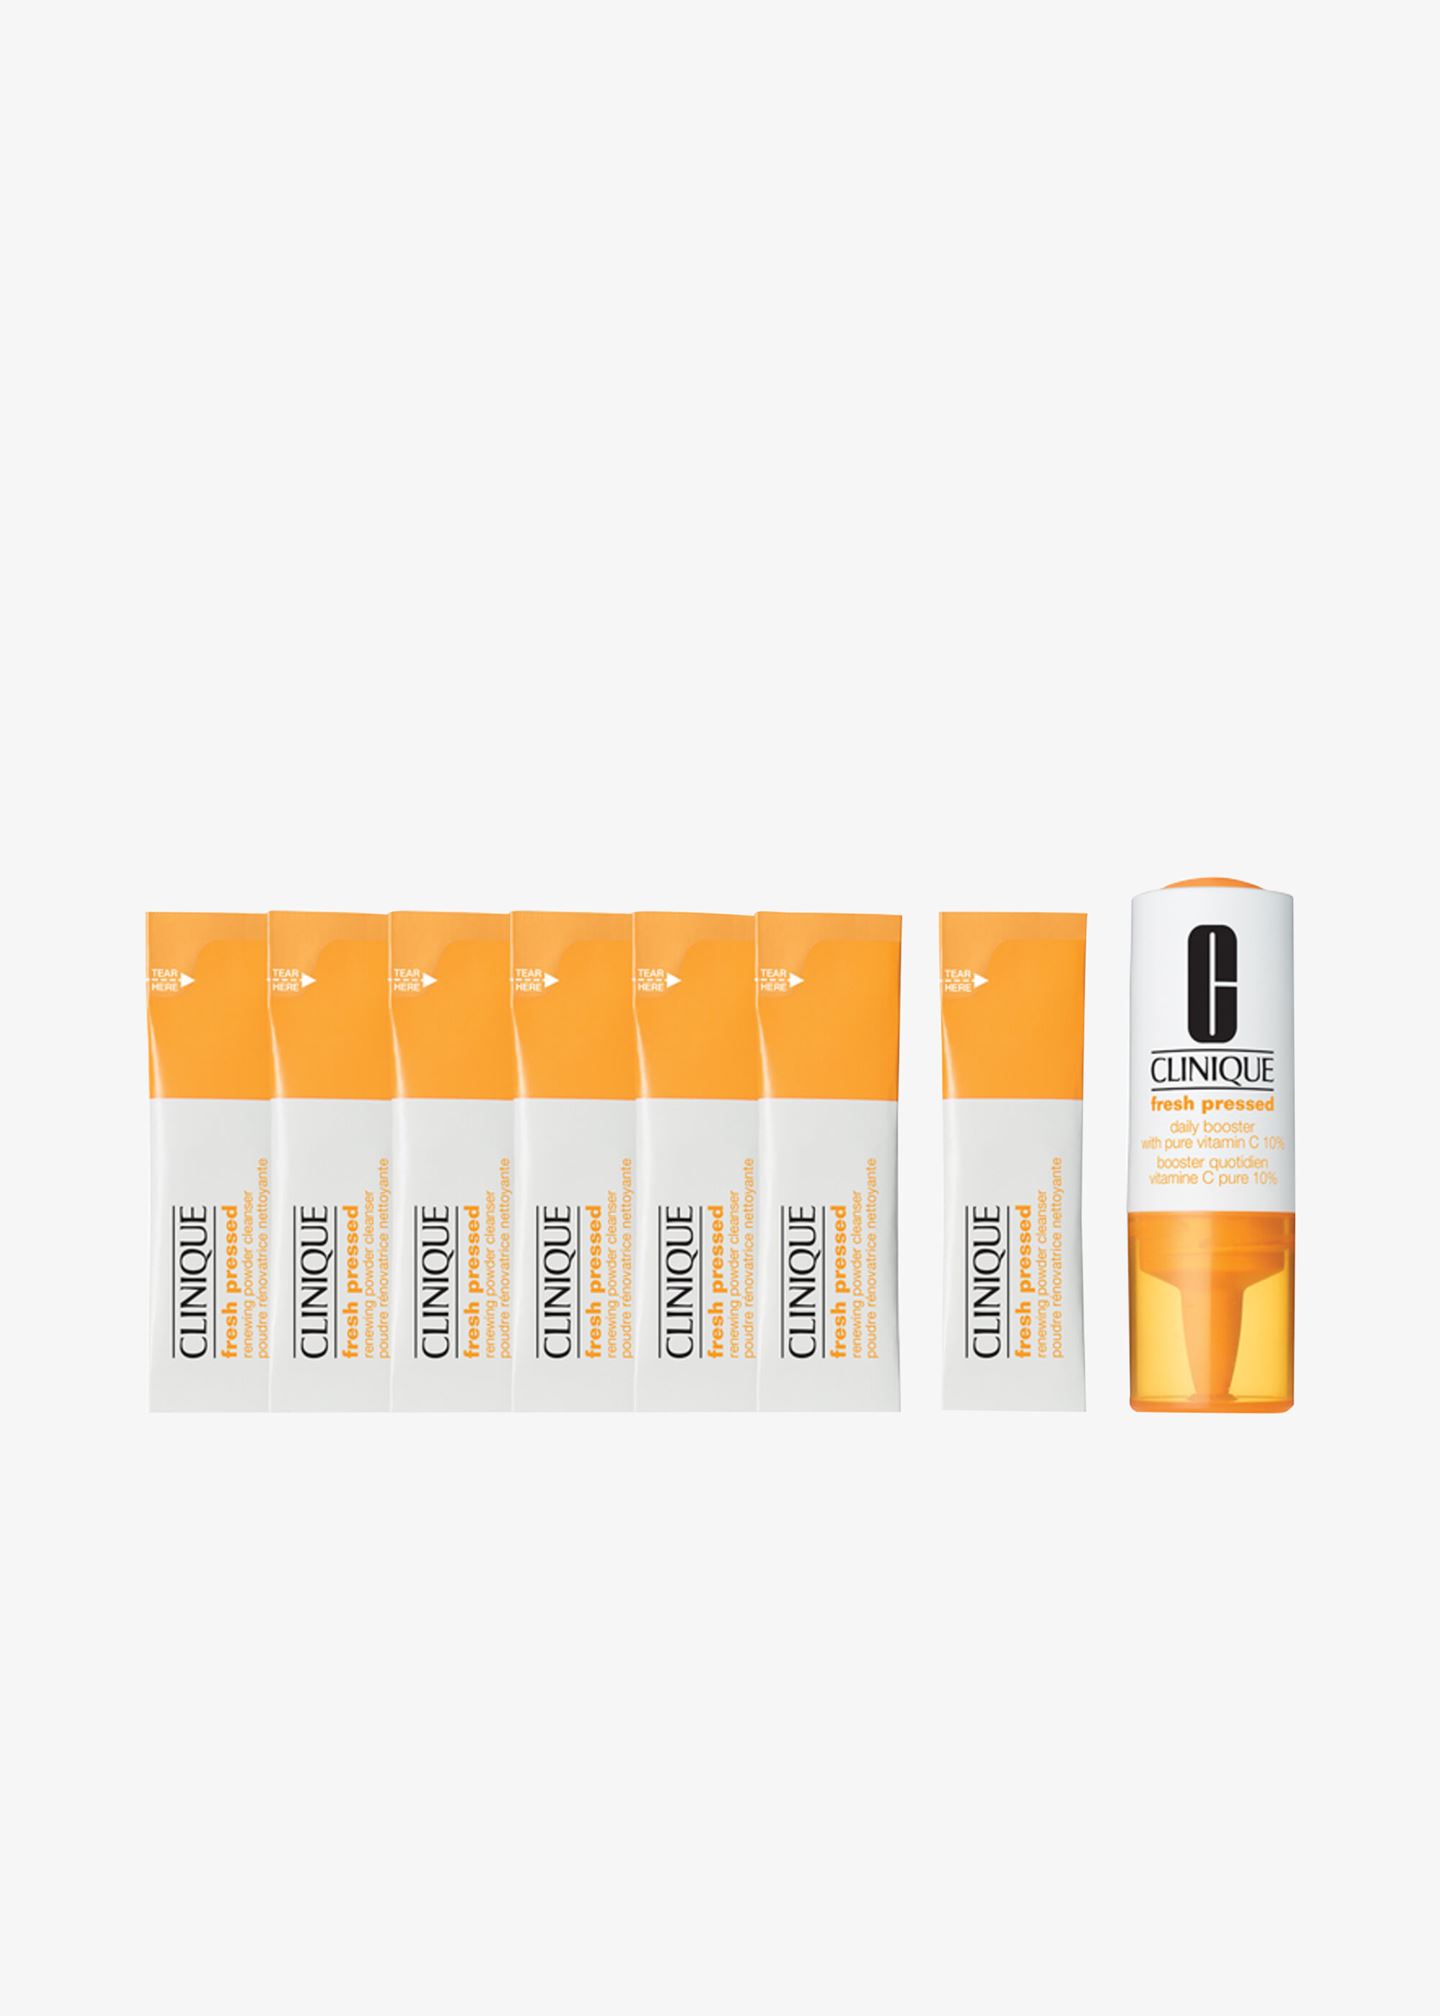 Reiniger «Fresh Pressed 7-Day System with Pure Vitamin C»